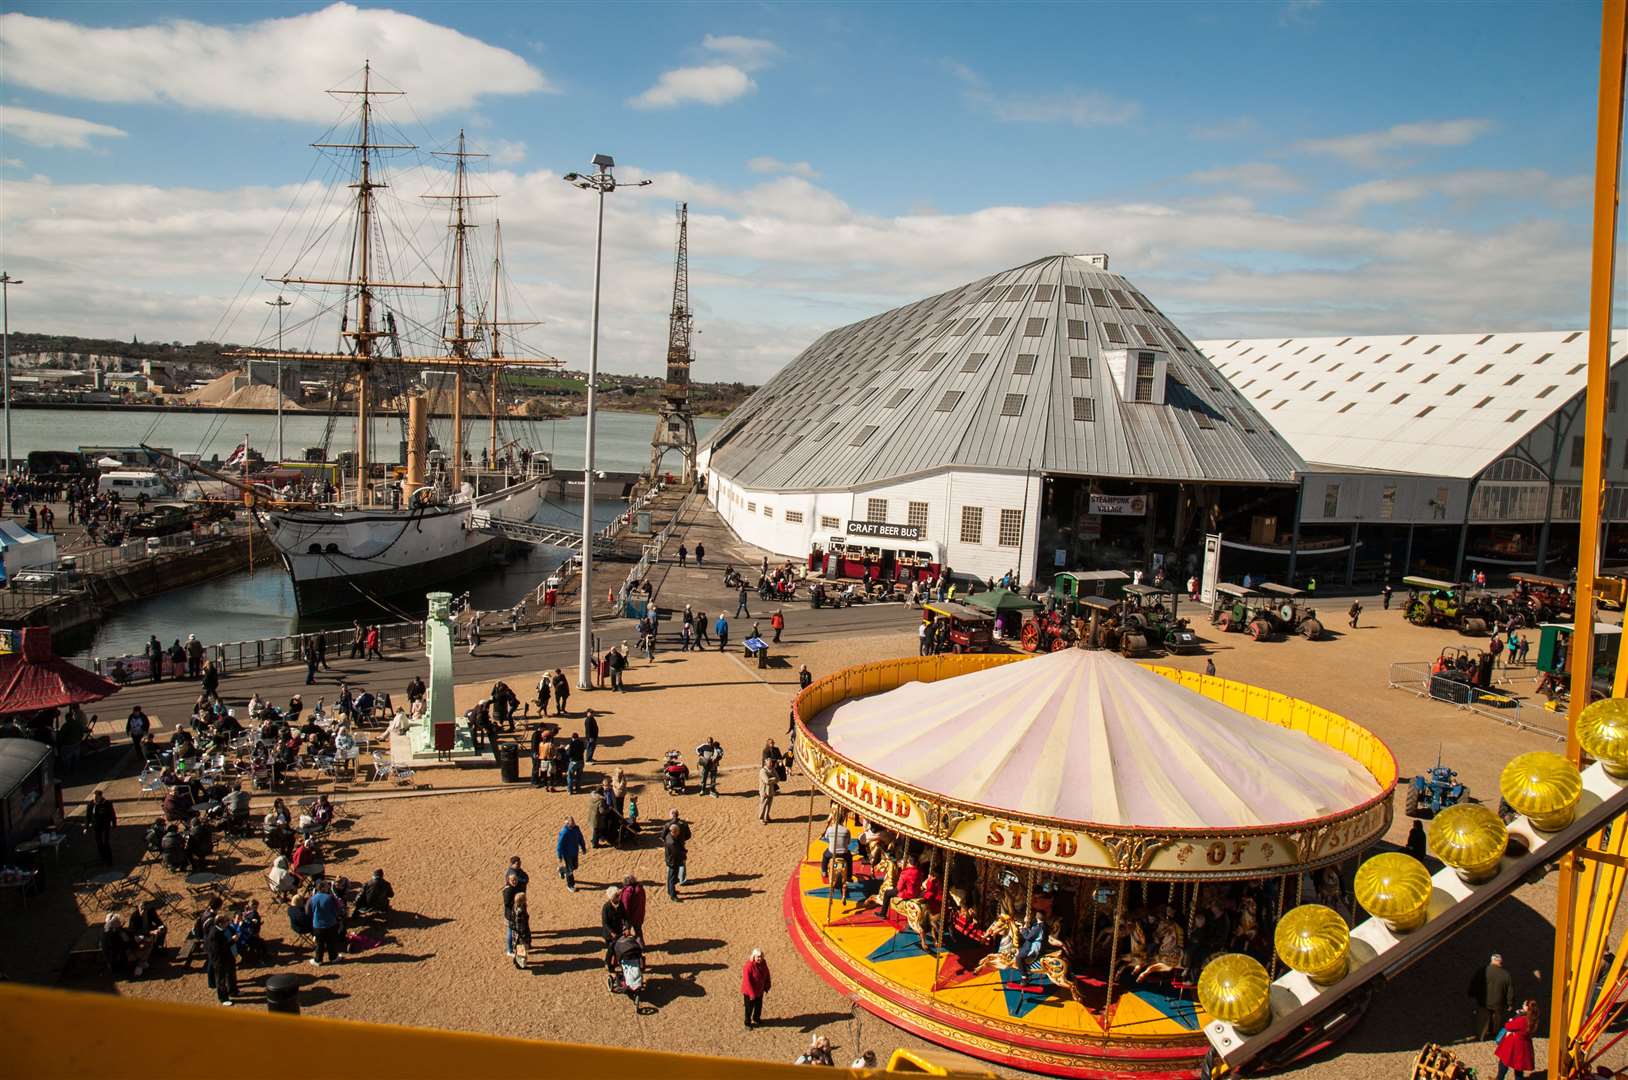 The Chatham Historic Dockyard will play host to the gaming festival